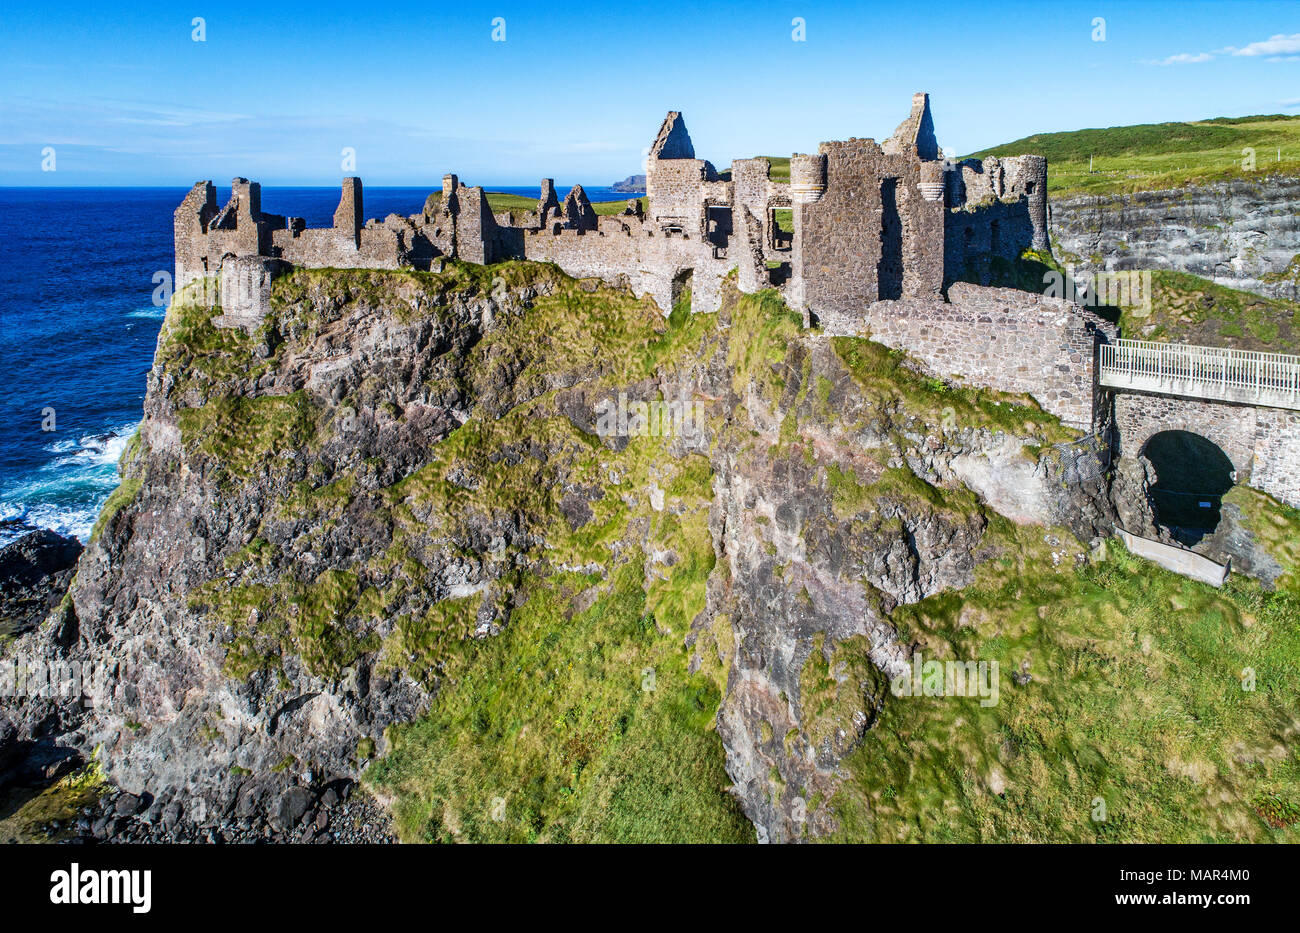 Ruins of medieval Dunluce Castle, cliffs, bays and peninsulas. Northern coast of County Antrim, Northern Ireland, UK. Aerial view. Stock Photo